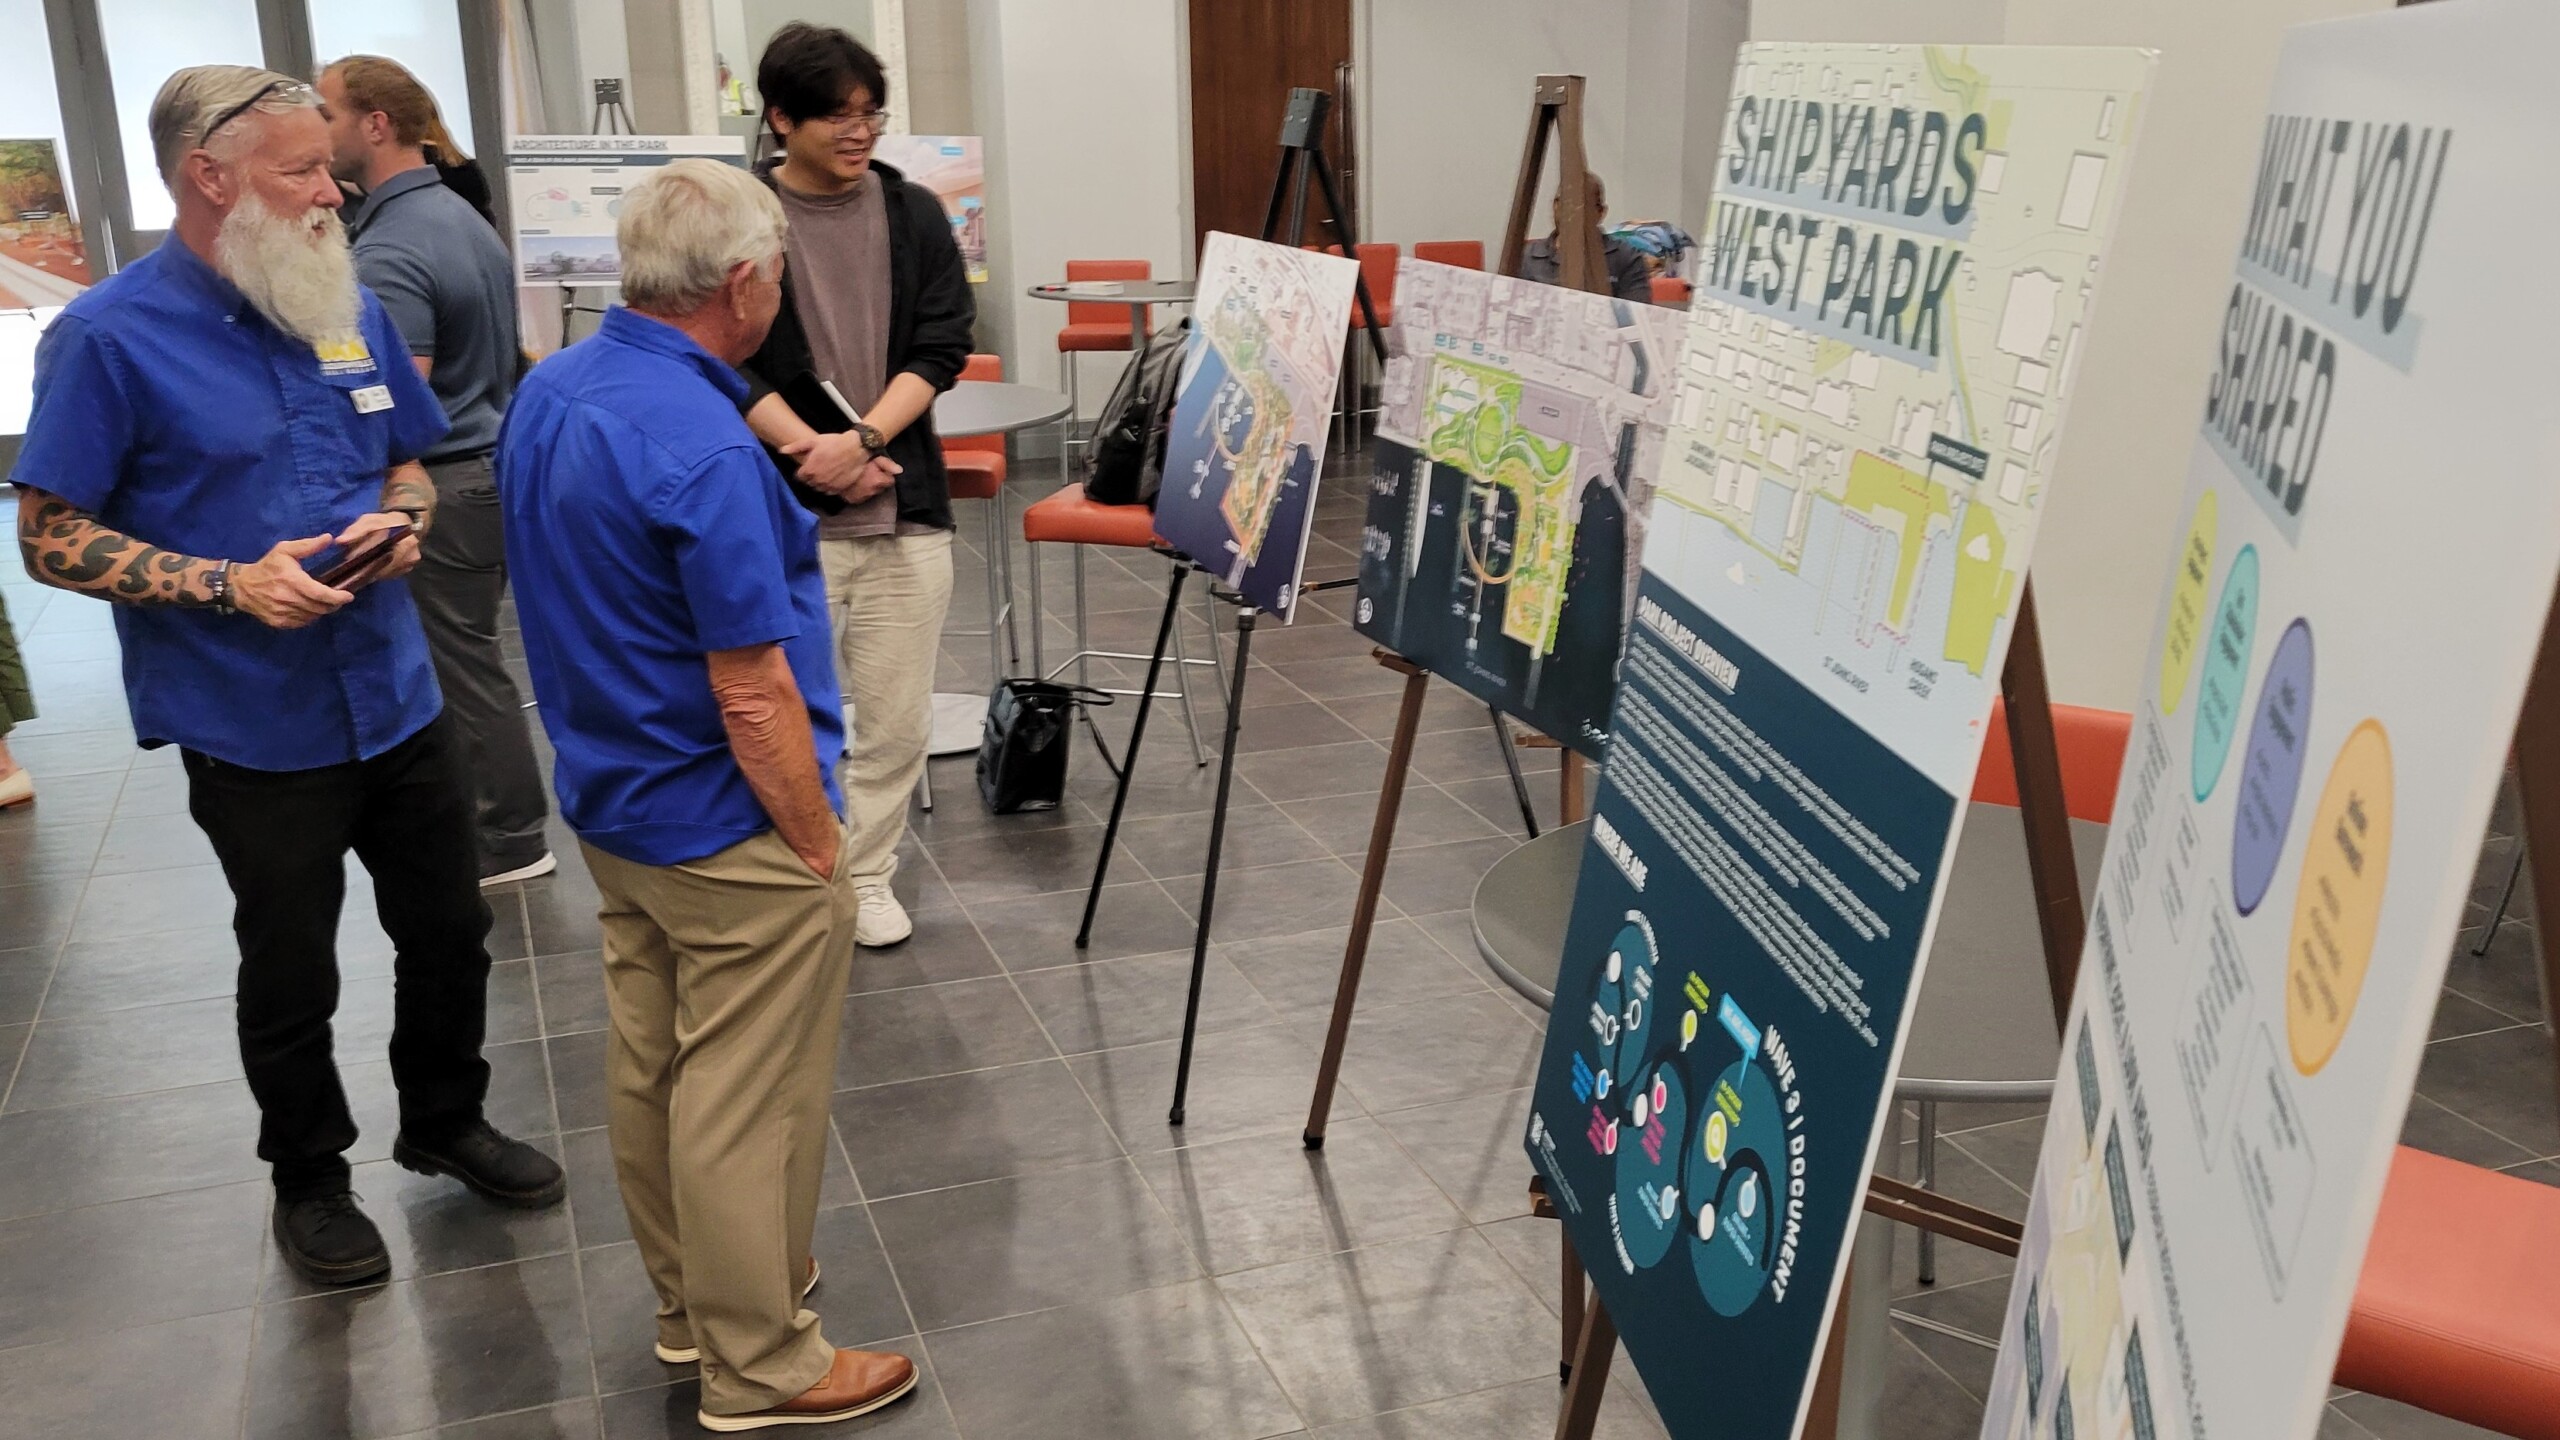 Senior volunteers from the USS Orleck maritime museum, on the west side of the planned Shipyards West Park, look at design drawings for the site. | Dan Scanlan, Jacksonville Today